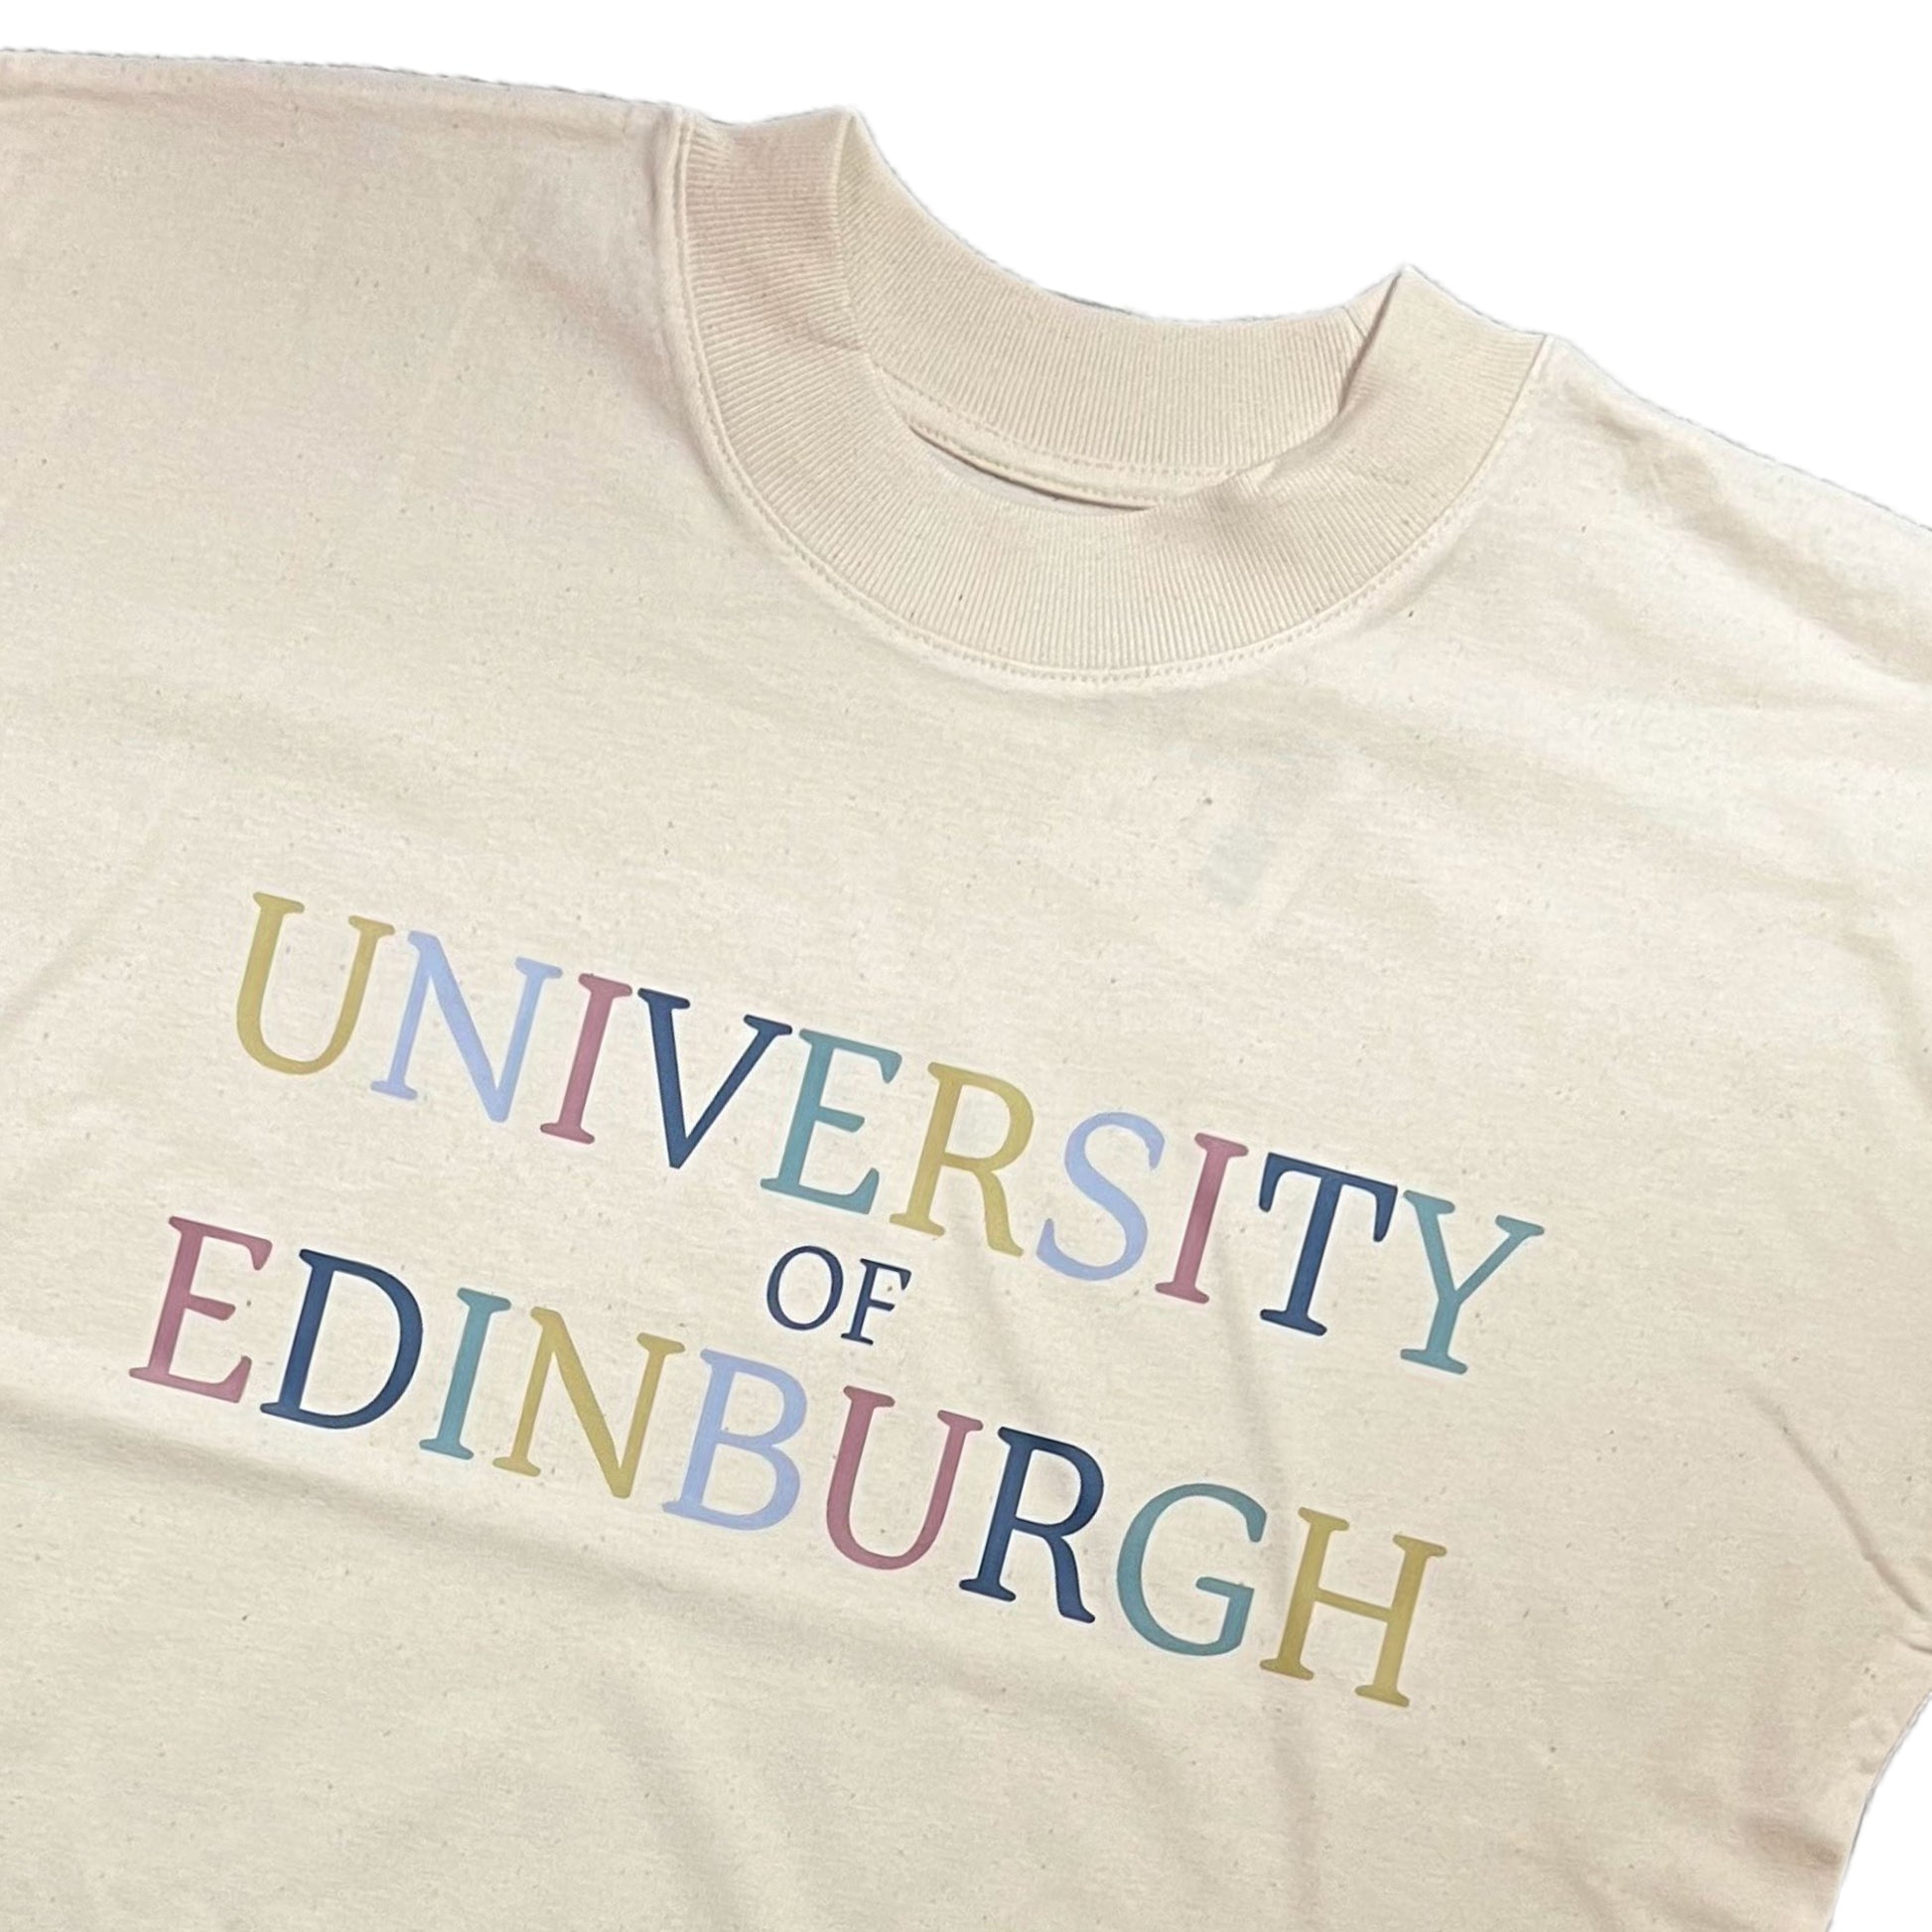 Close-up of colour text on oversized T-shirt.